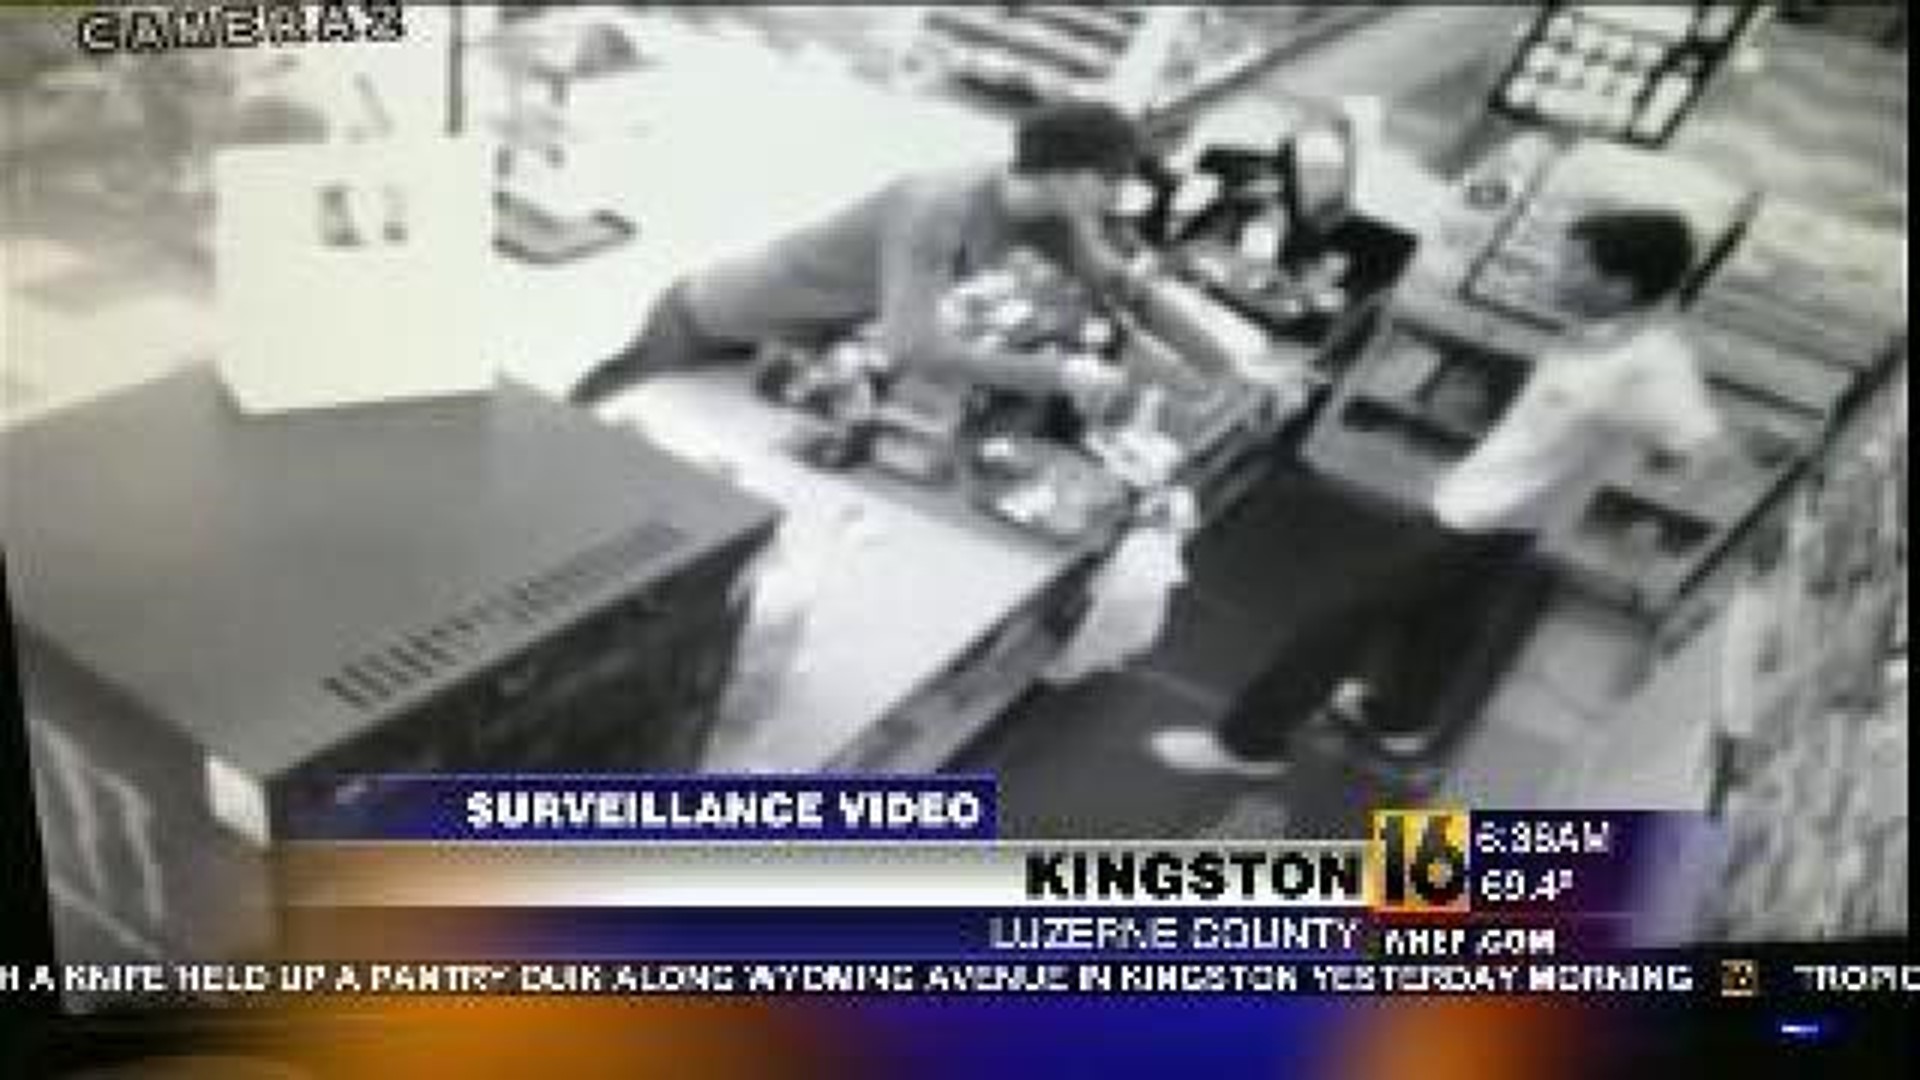 Update: Pantry Quick Robbed, Video Released